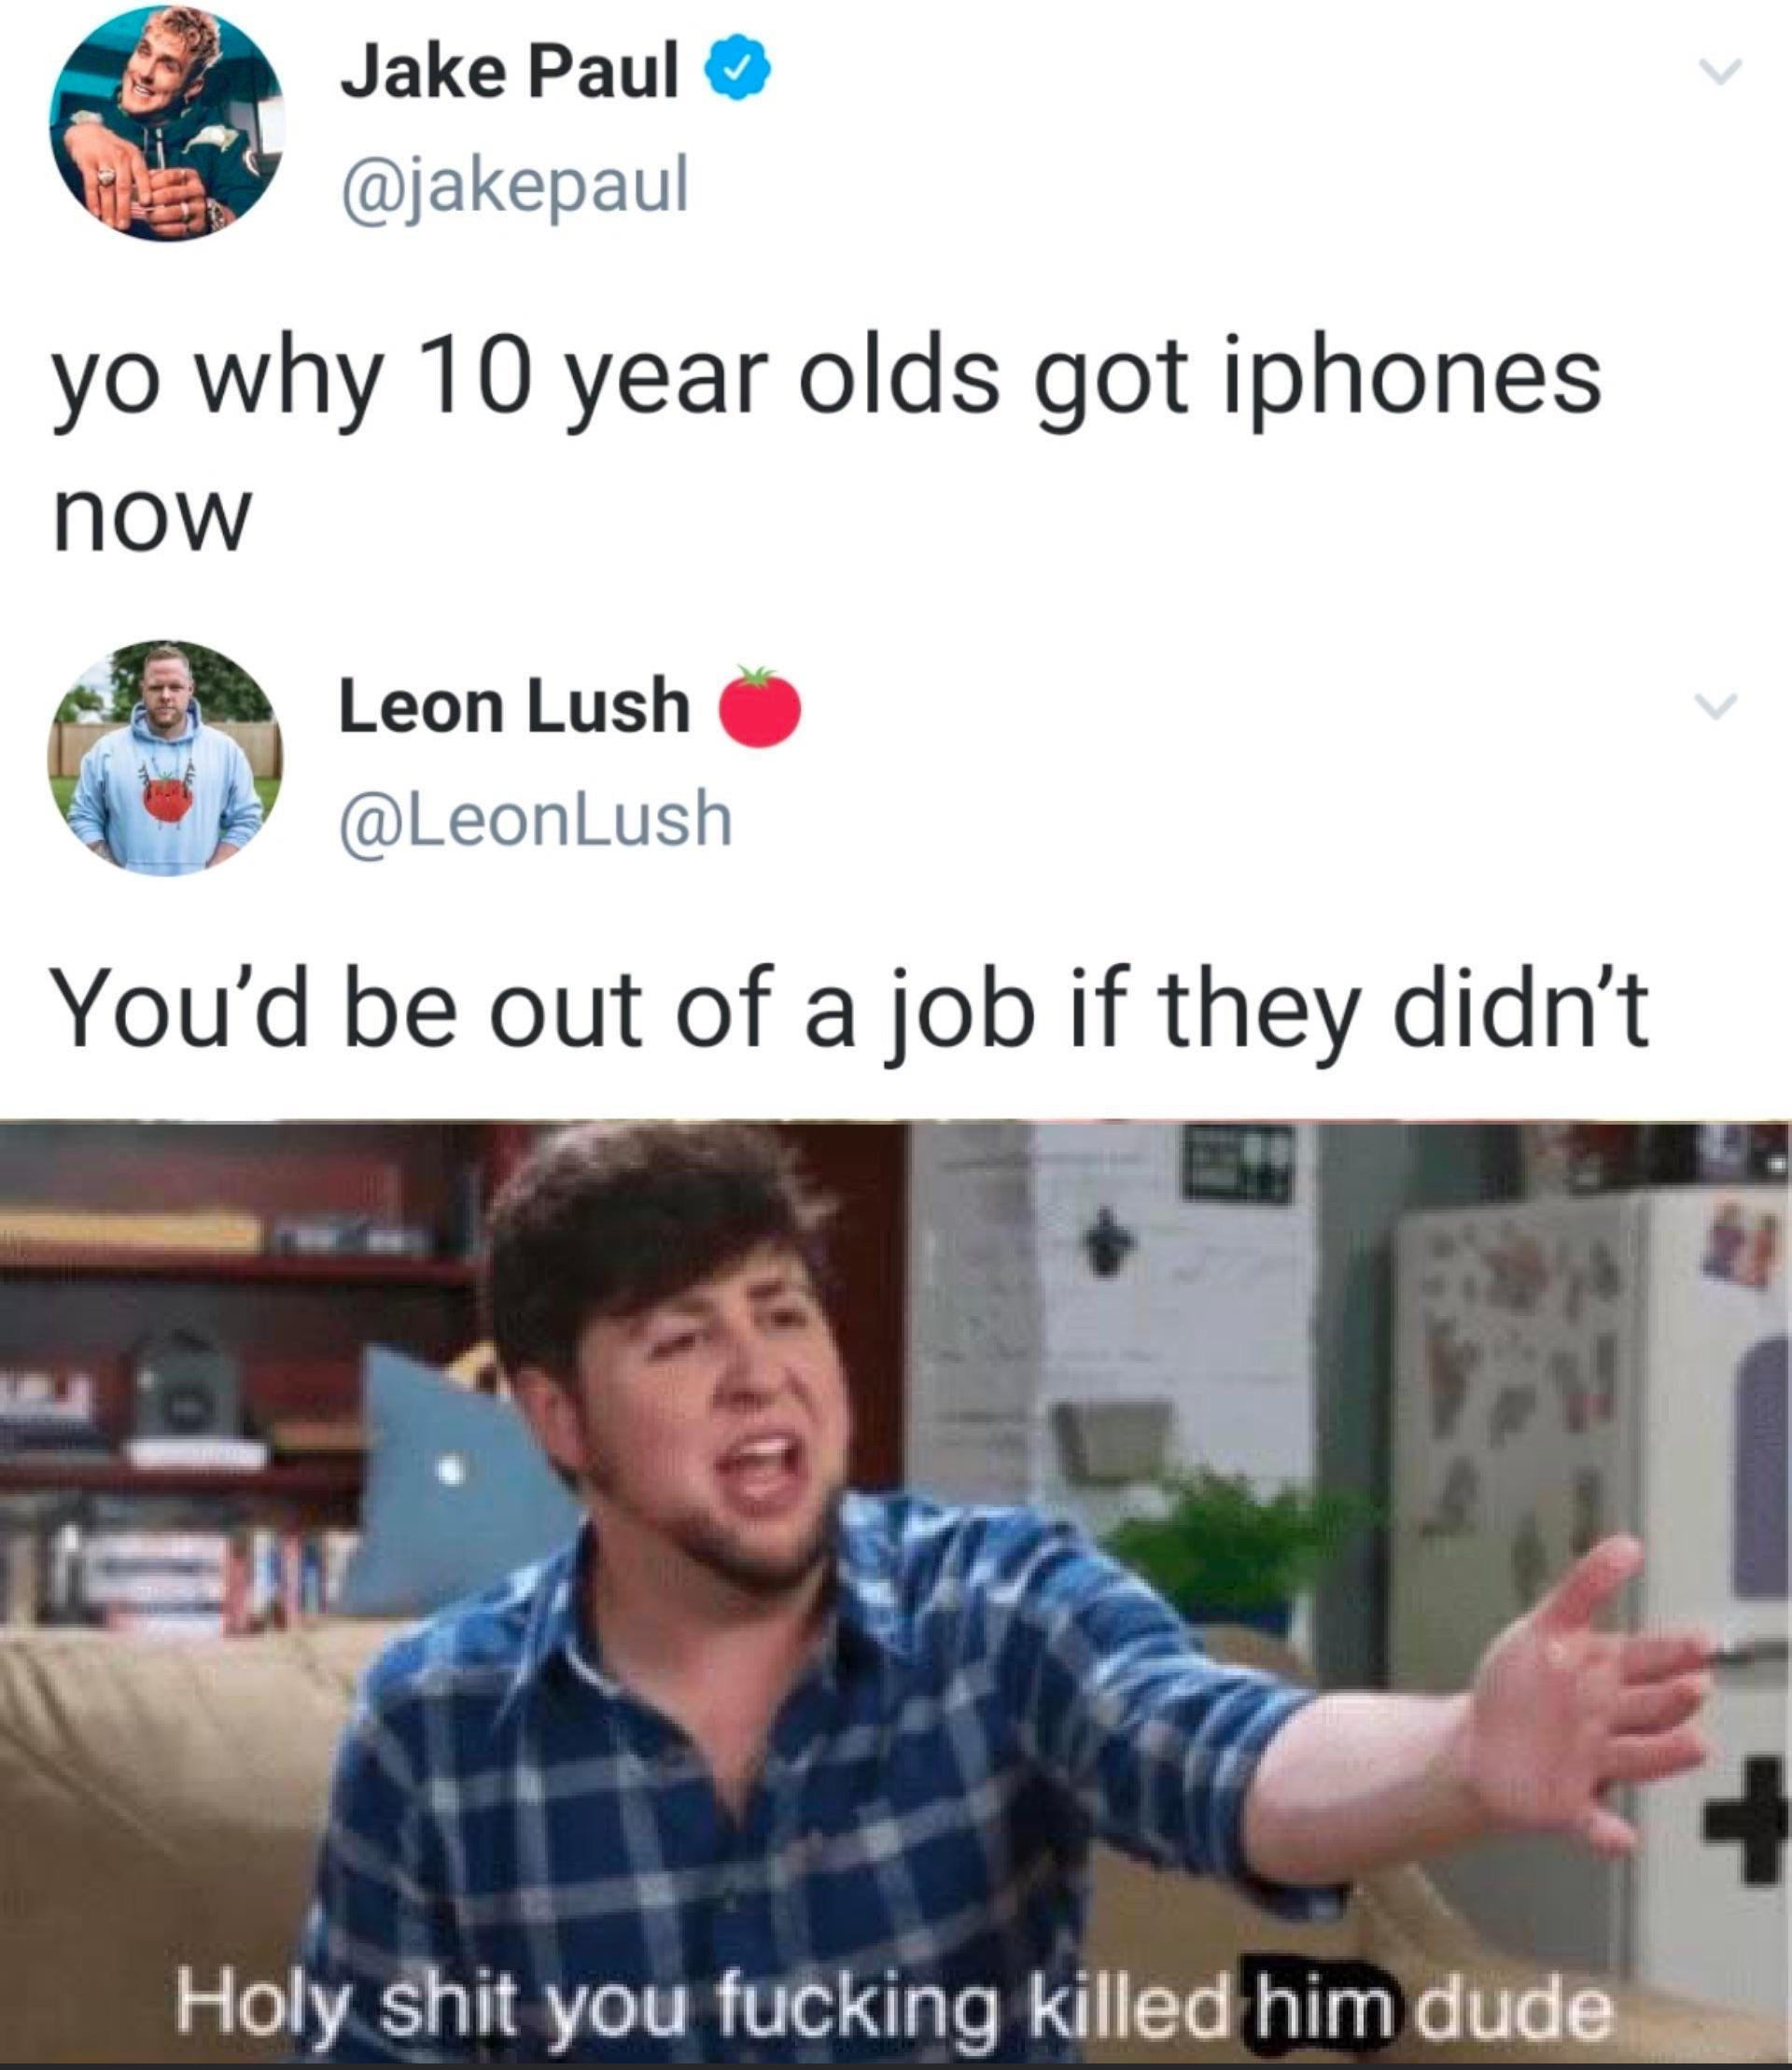 holy shit you fucking killed him dude - Jake Paul yo why 10 year olds got iphones now Leon Lush You'd be out of a job if they didn't Holy shit you fucking killed him dude